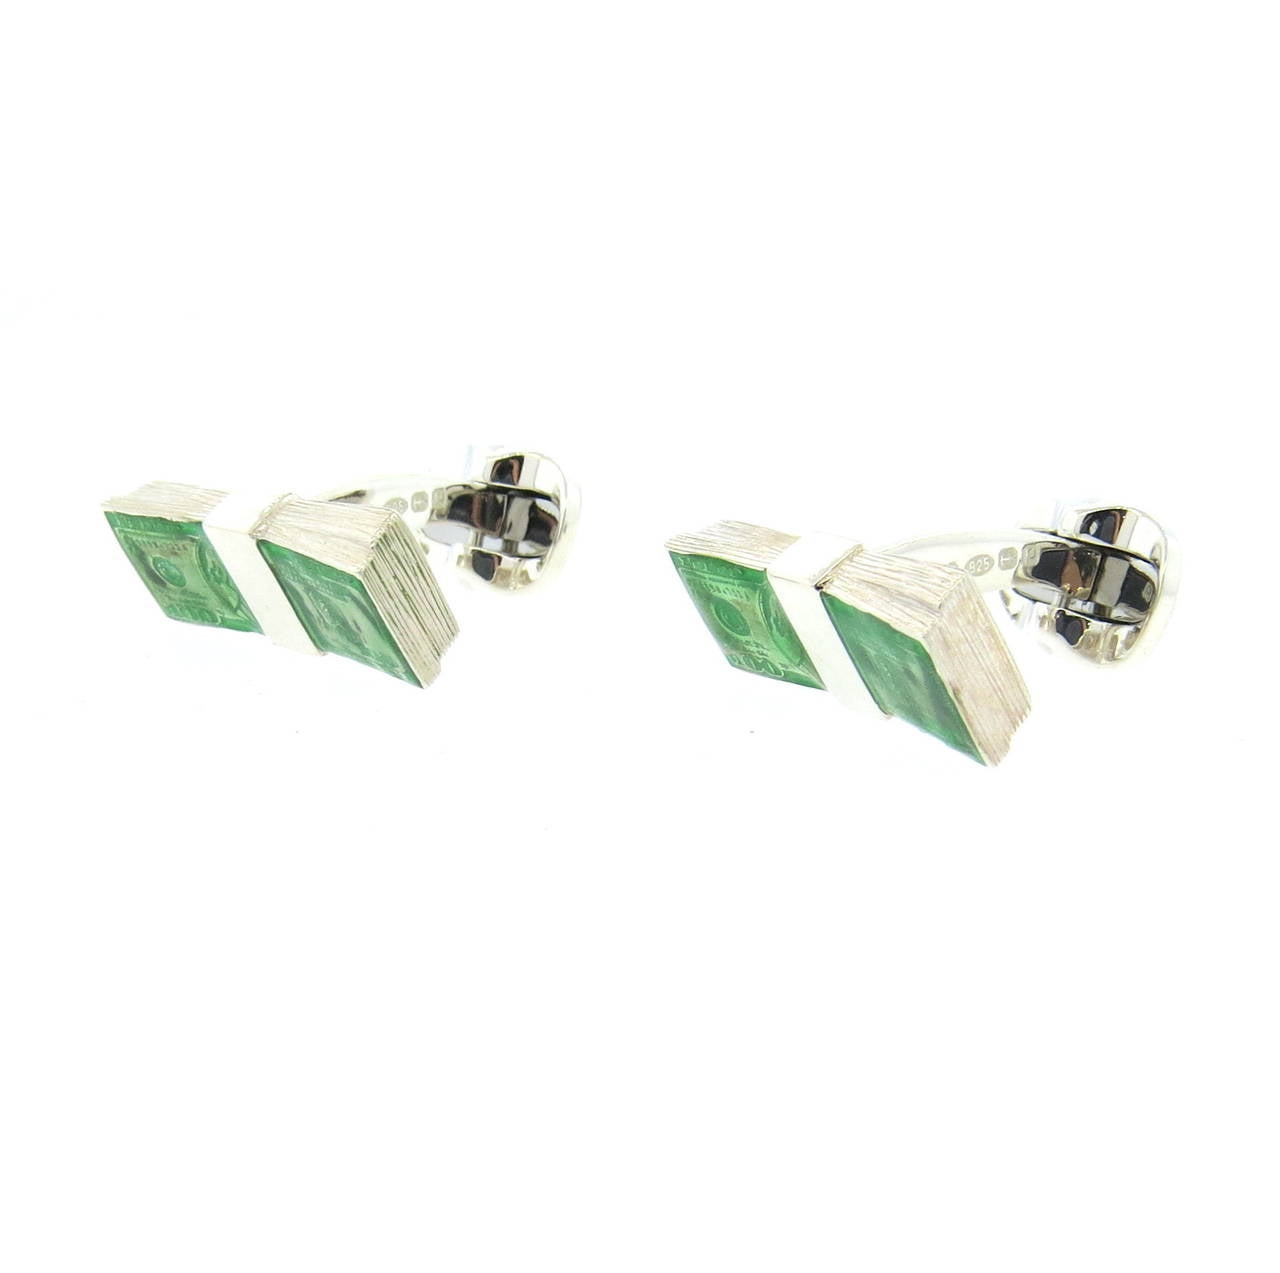 A pair of sterling silver and enamel cufflinks depicting hundred dollar bills.  Crafted by Deakin & Francis, the cufflinks measure 24mm x 10mm and weigh 17.6 grams.